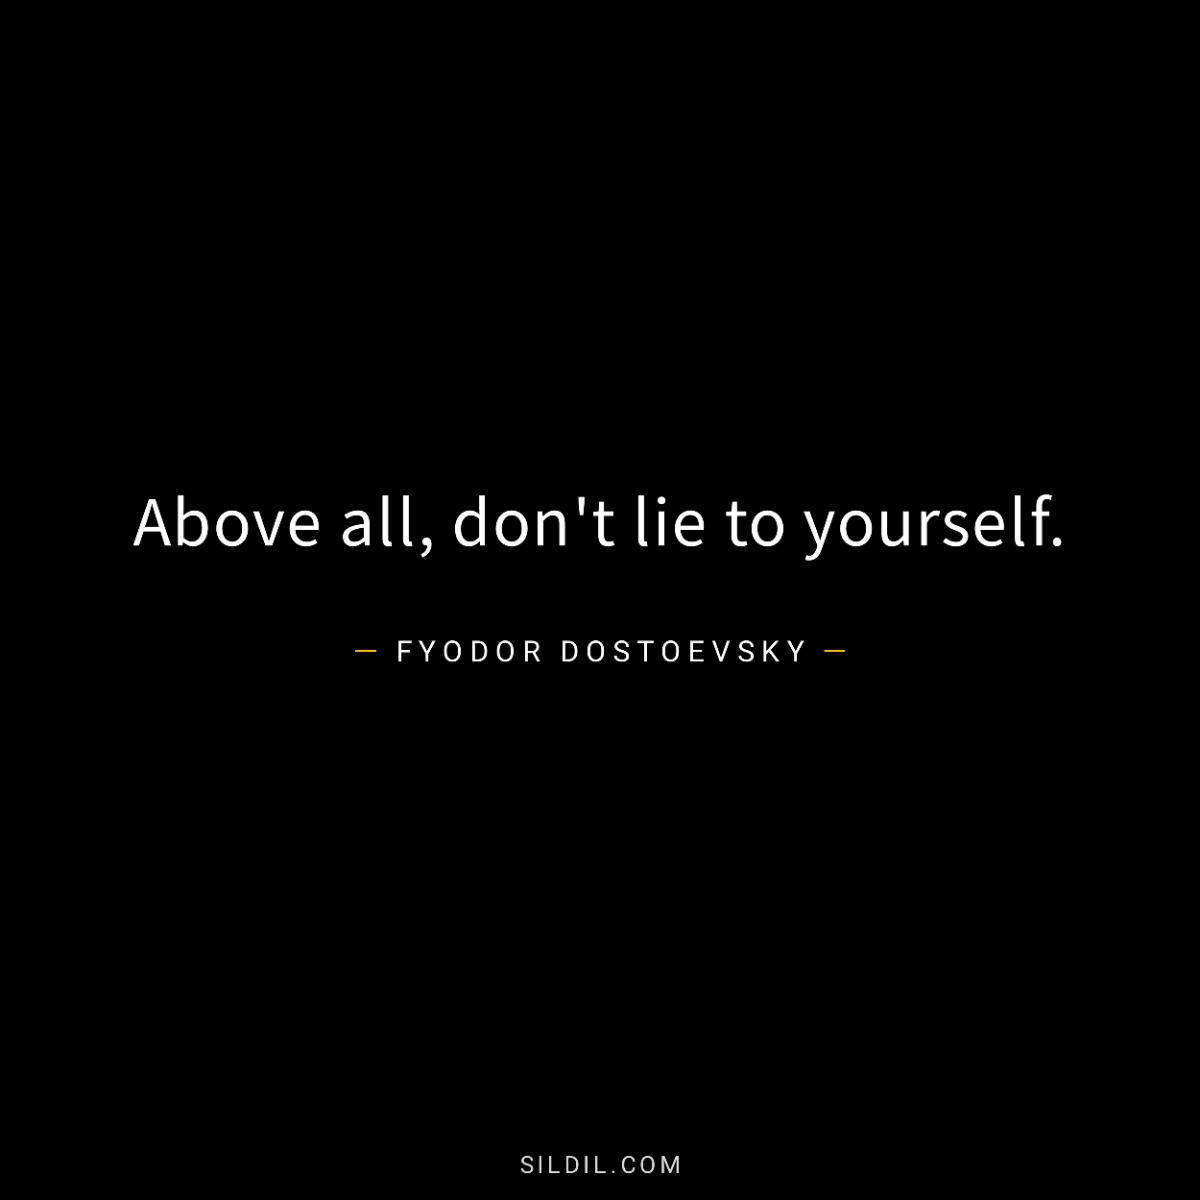 Above all, don't lie to yourself.